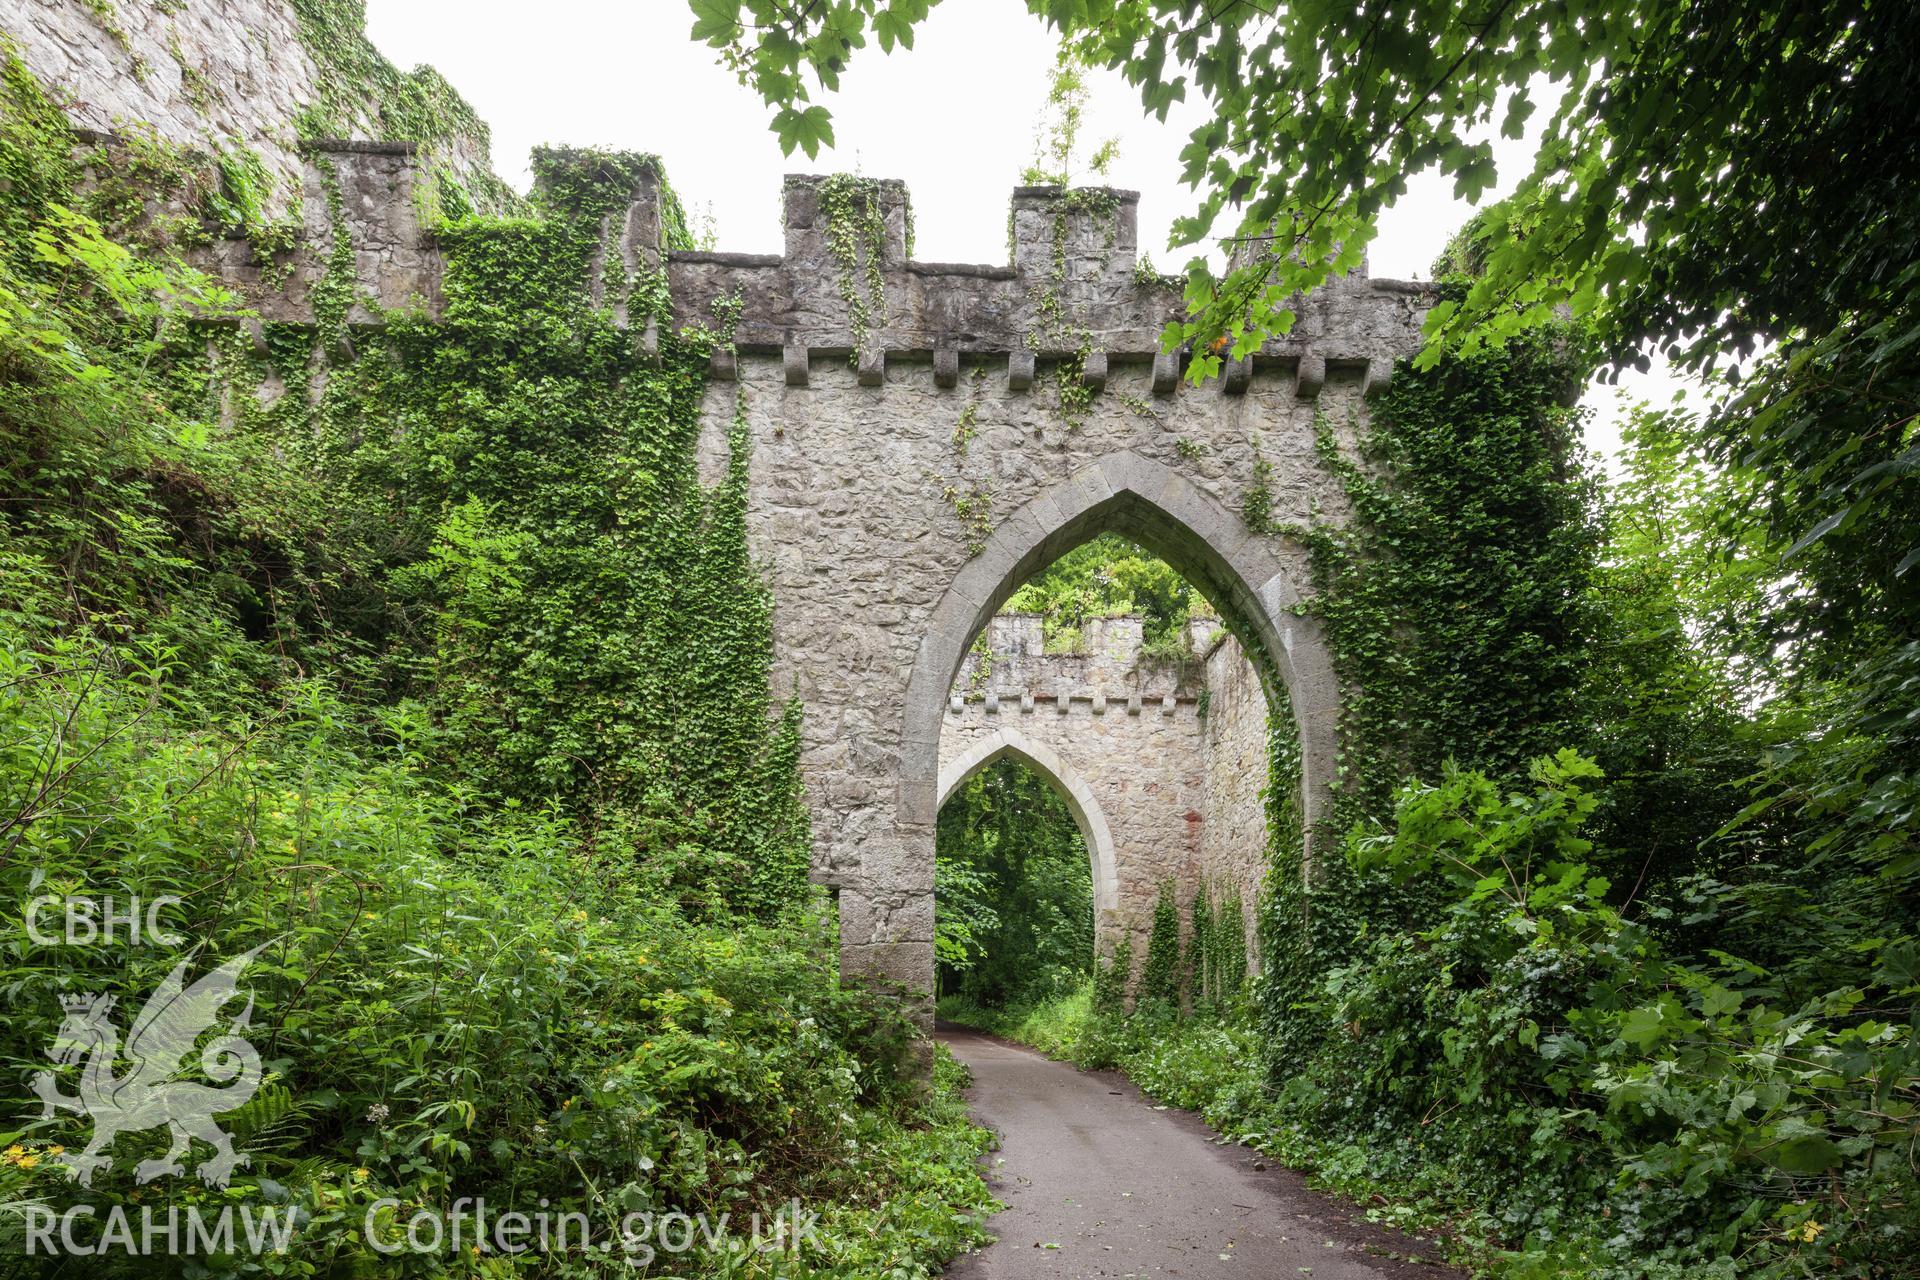 Entrance arches leading to main gate from the east